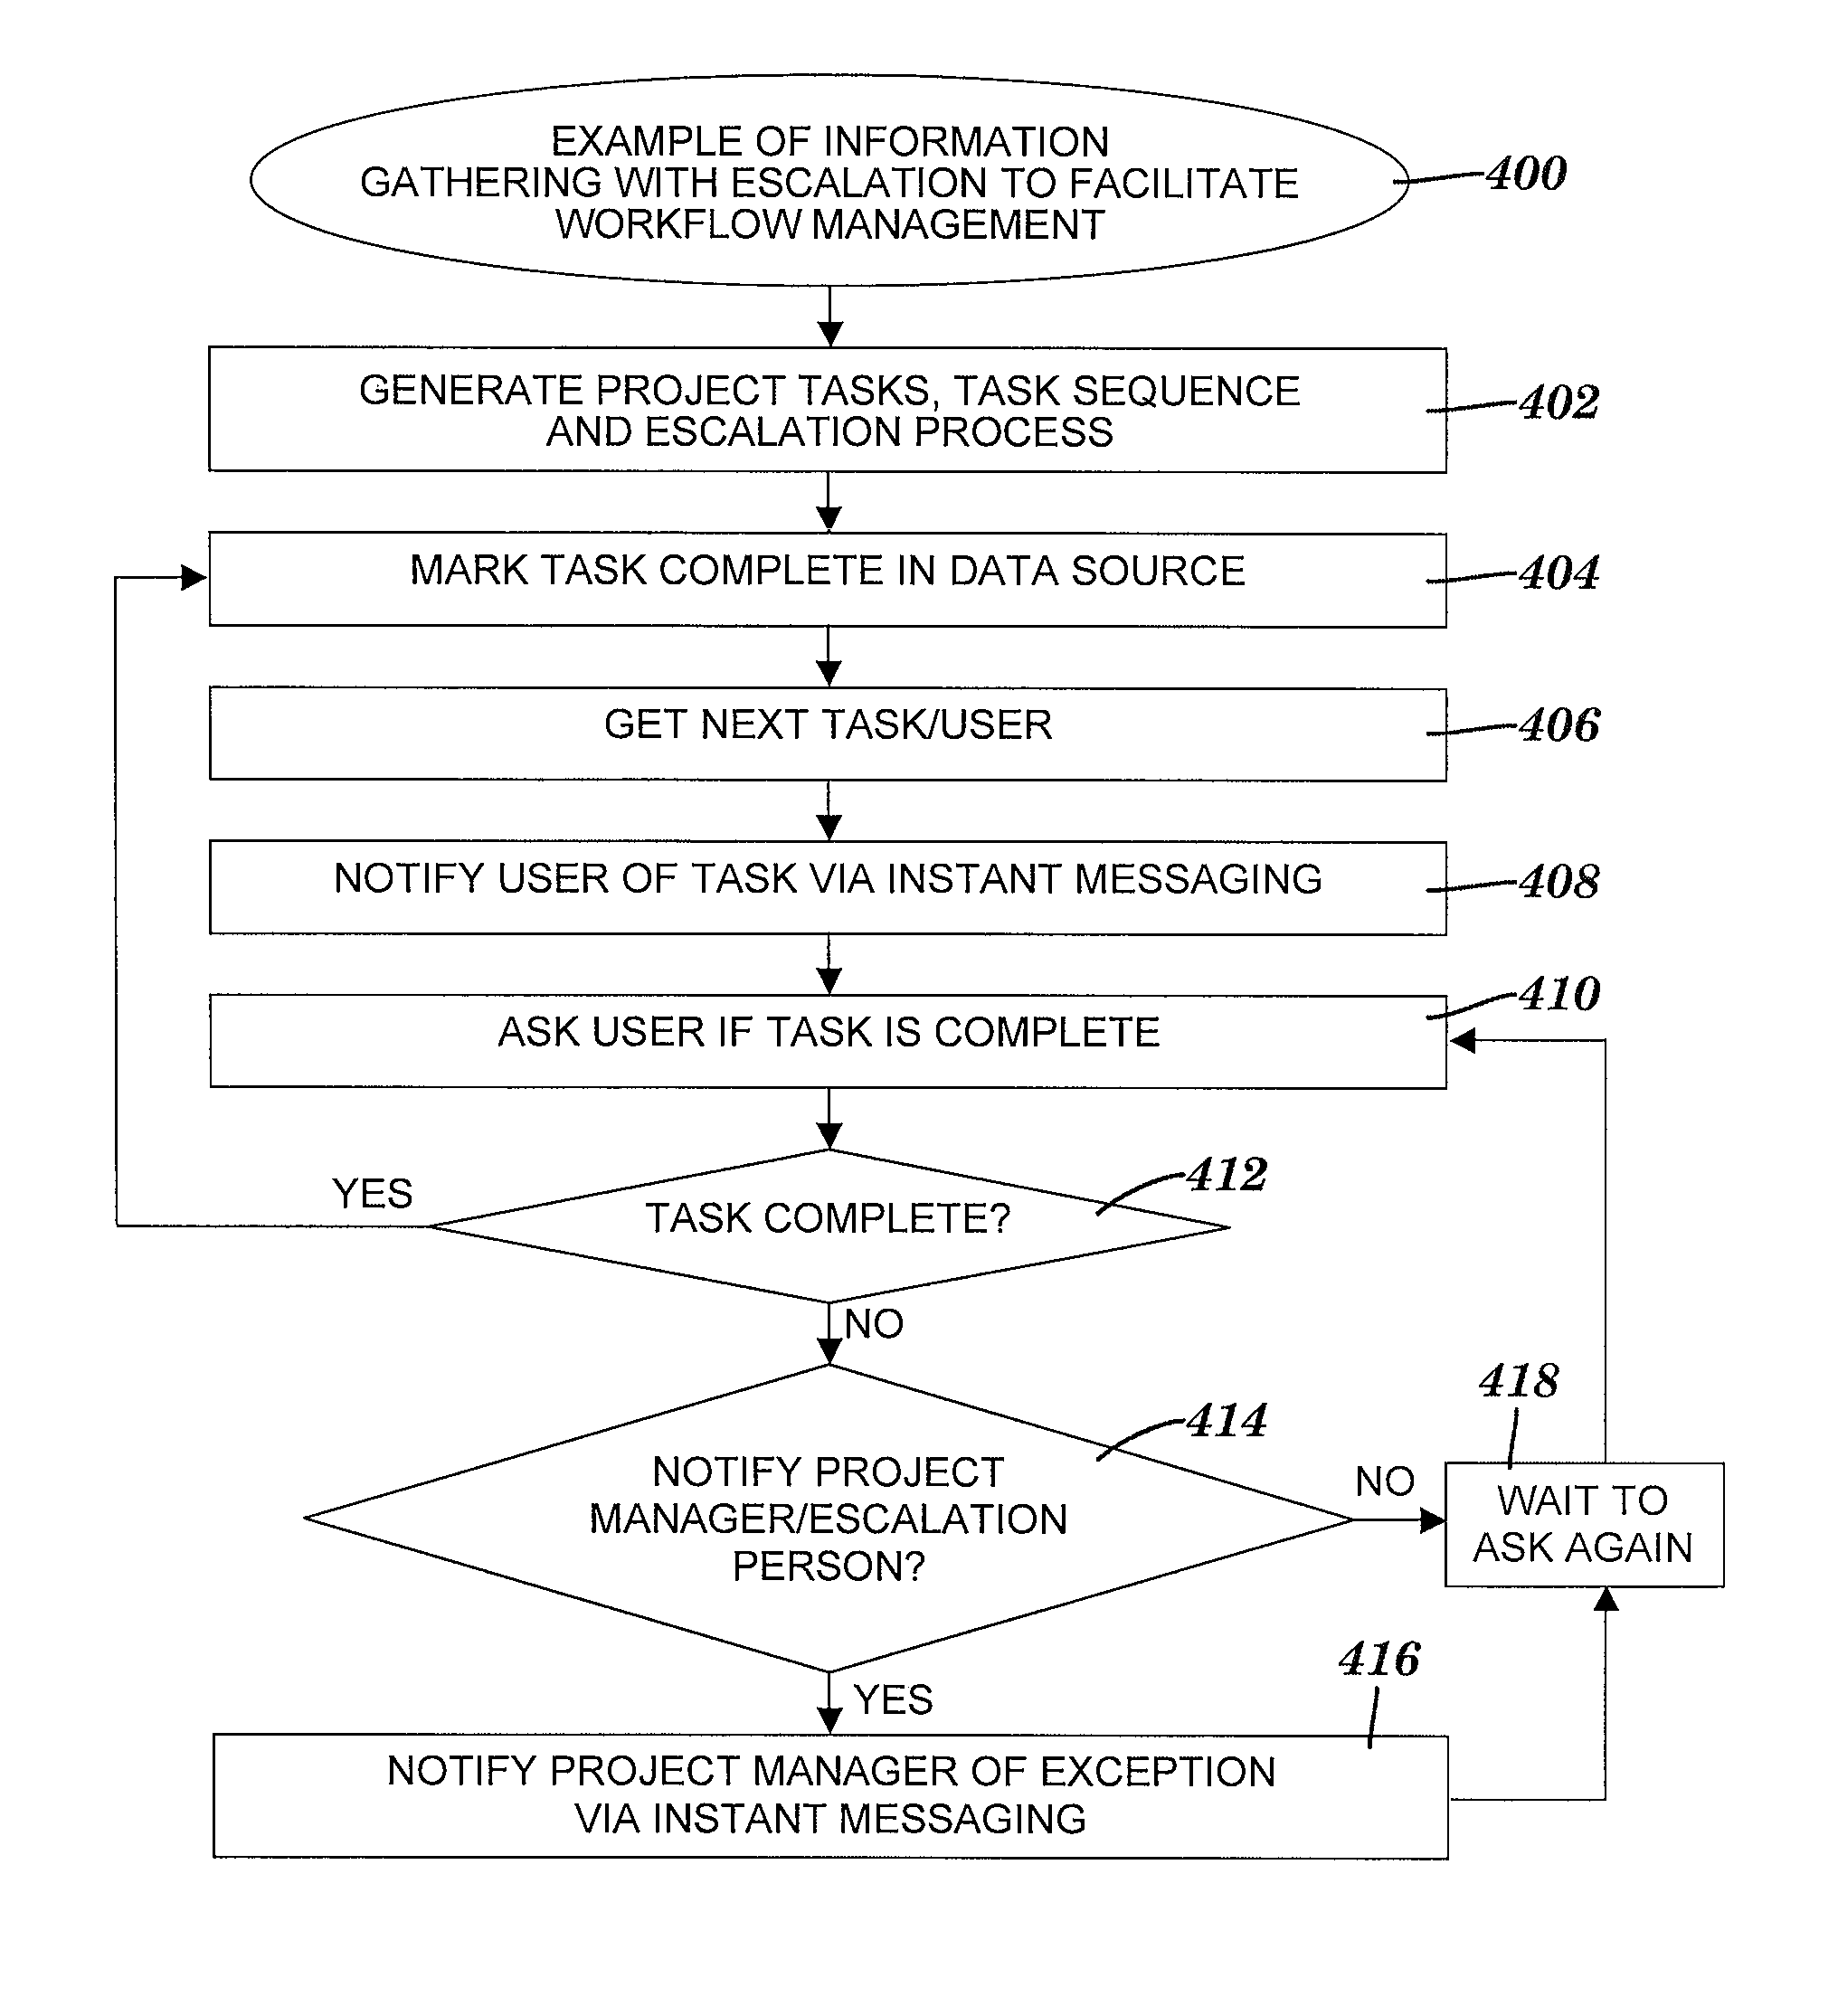 Managing a workflow using an instant messaging system to gather task status information